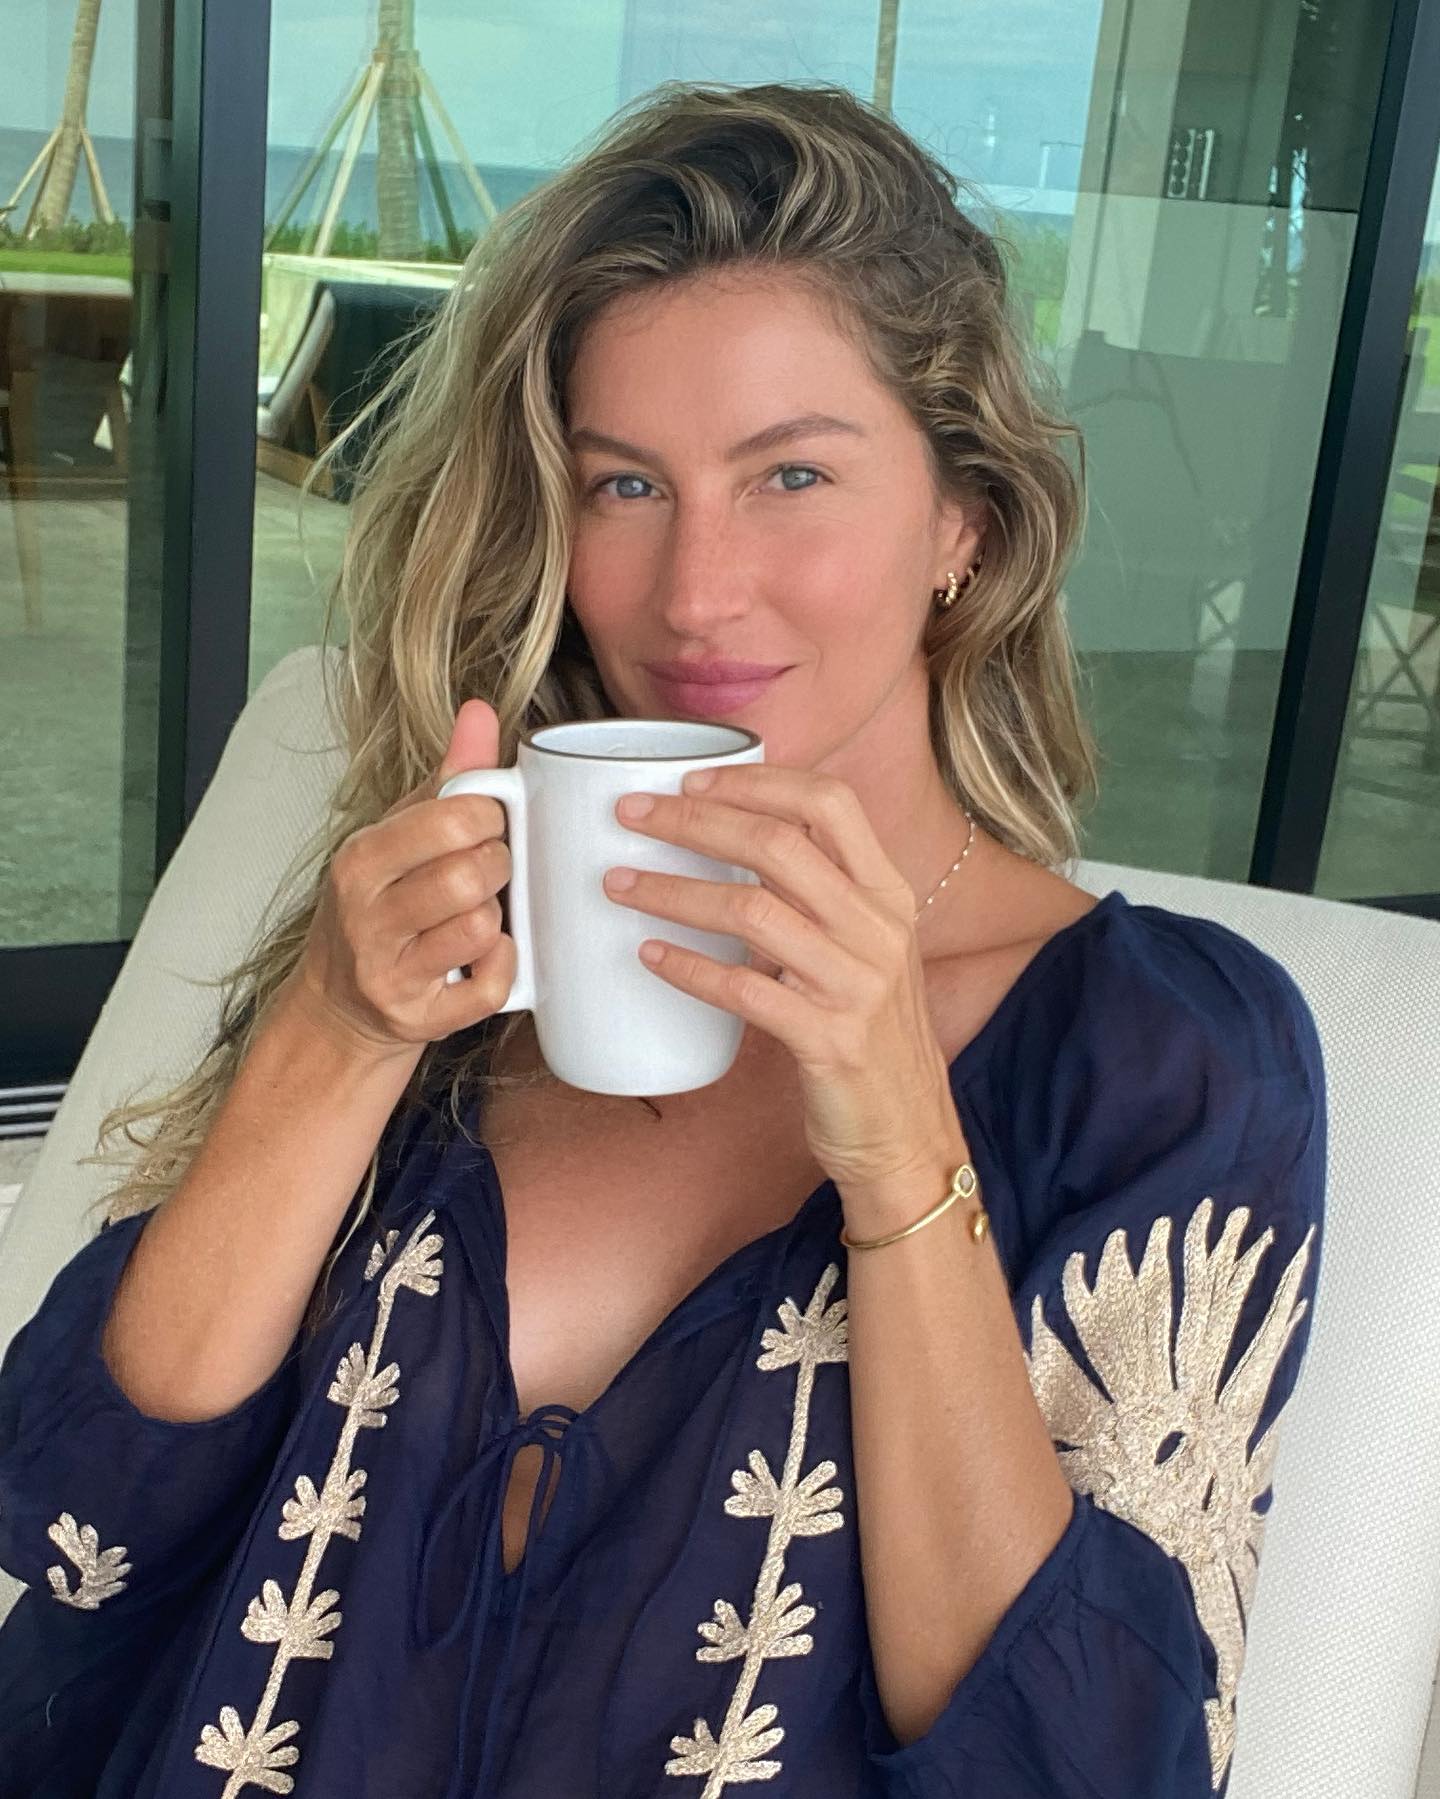 Gisele Bundchen drinking tea with natural-looking makeup